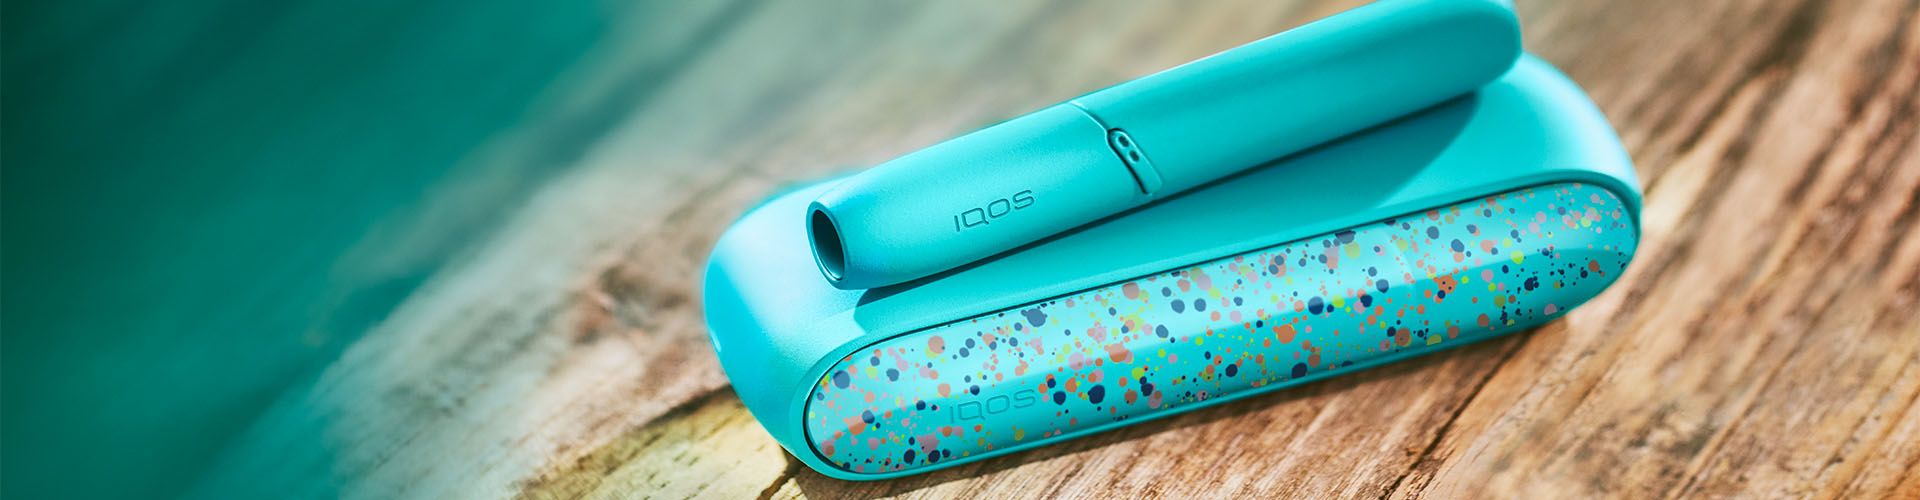 IQOS 3 DUO WE Limited Edition Device and Accessories